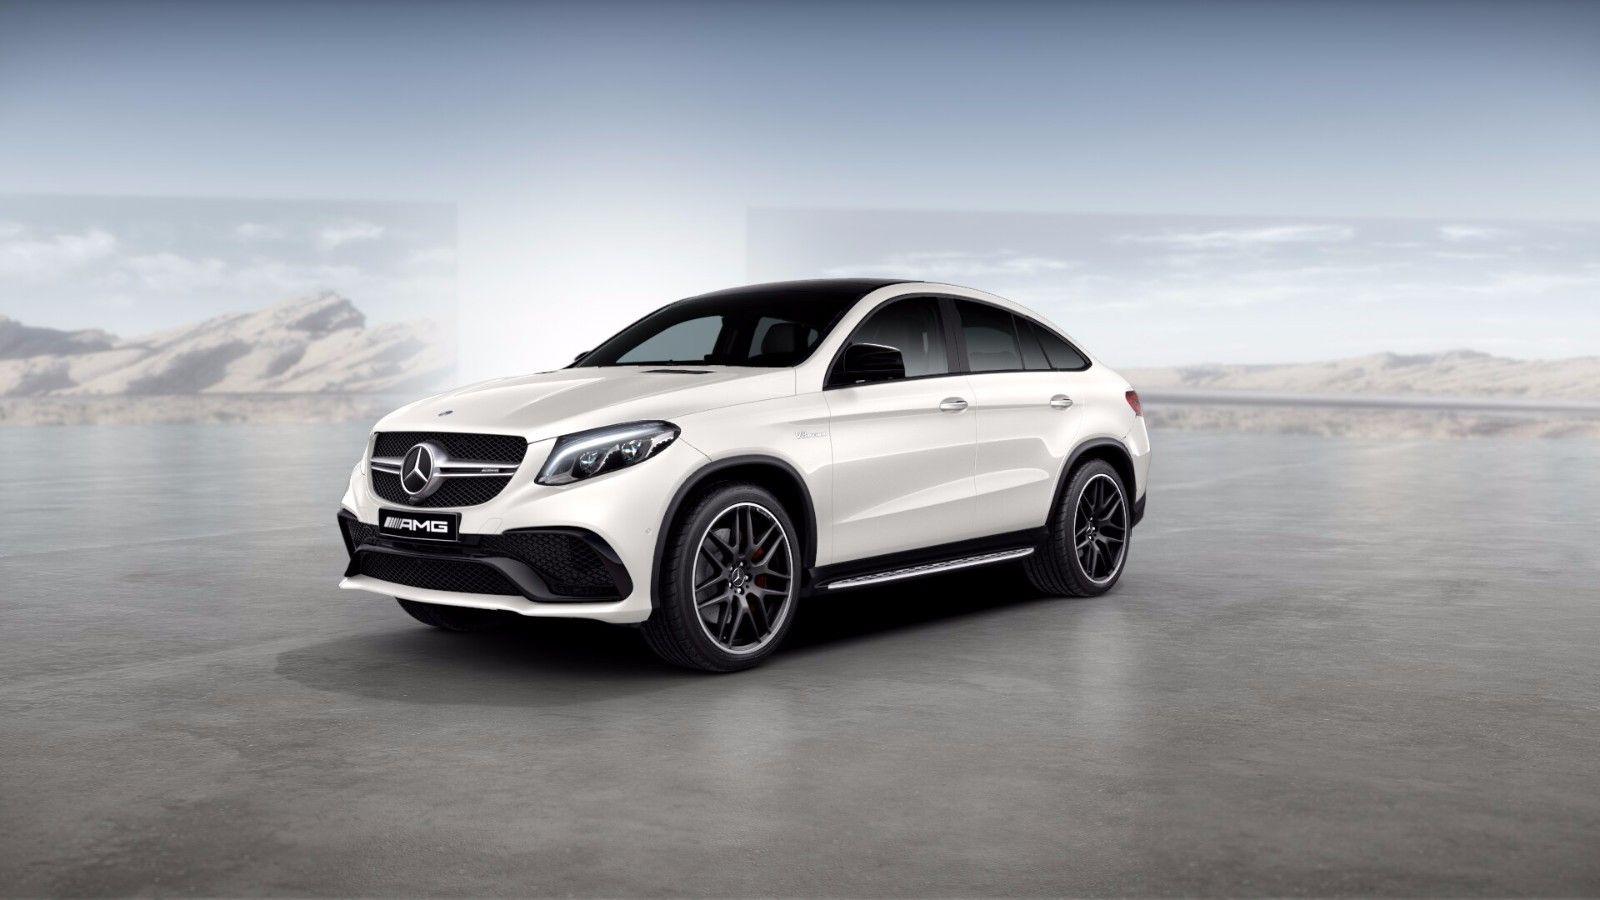 Mercedes Benz Gle Wallpapers Top Free Mercedes Benz Gle Backgrounds Wallpaperaccess